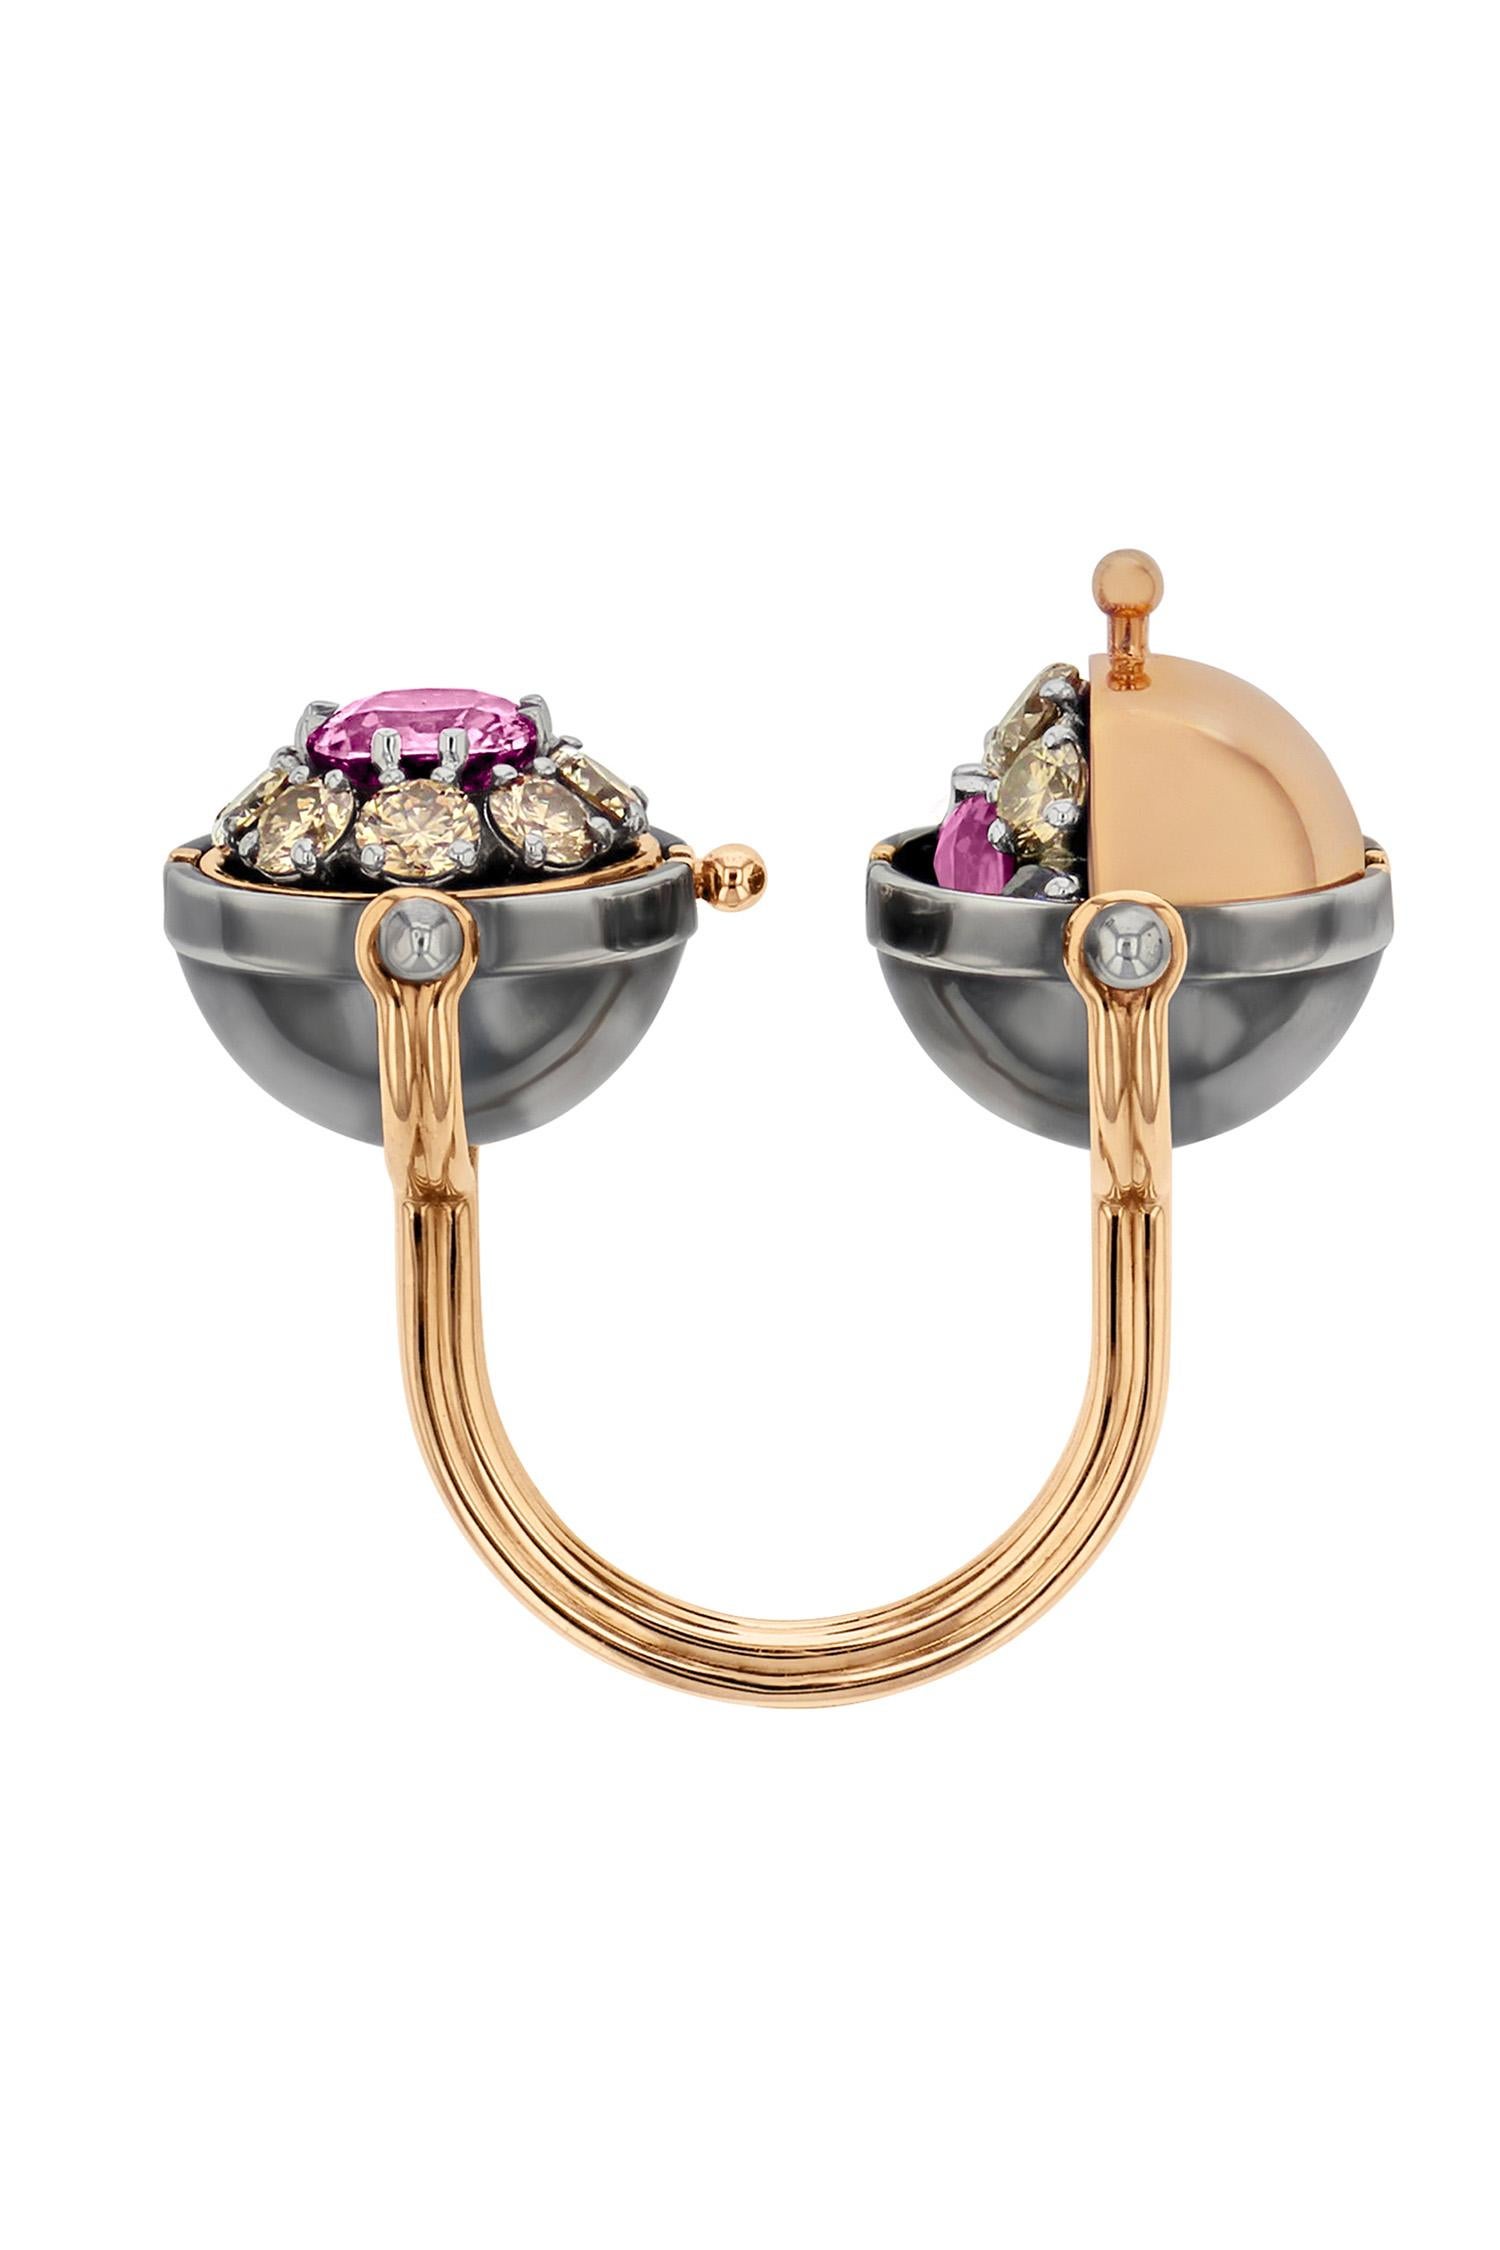 Rose gold and distressed silver earrings. Rotating spheres revealing two cushion cut pink sapphires surrounded by champagne diamonds.

Details: 
2 Cushion Cut Pink Sapphires: 1.03 cts
20 IFVVS Champagne Diamonds: 2.47 cts
18k Rose Gold: 13.5